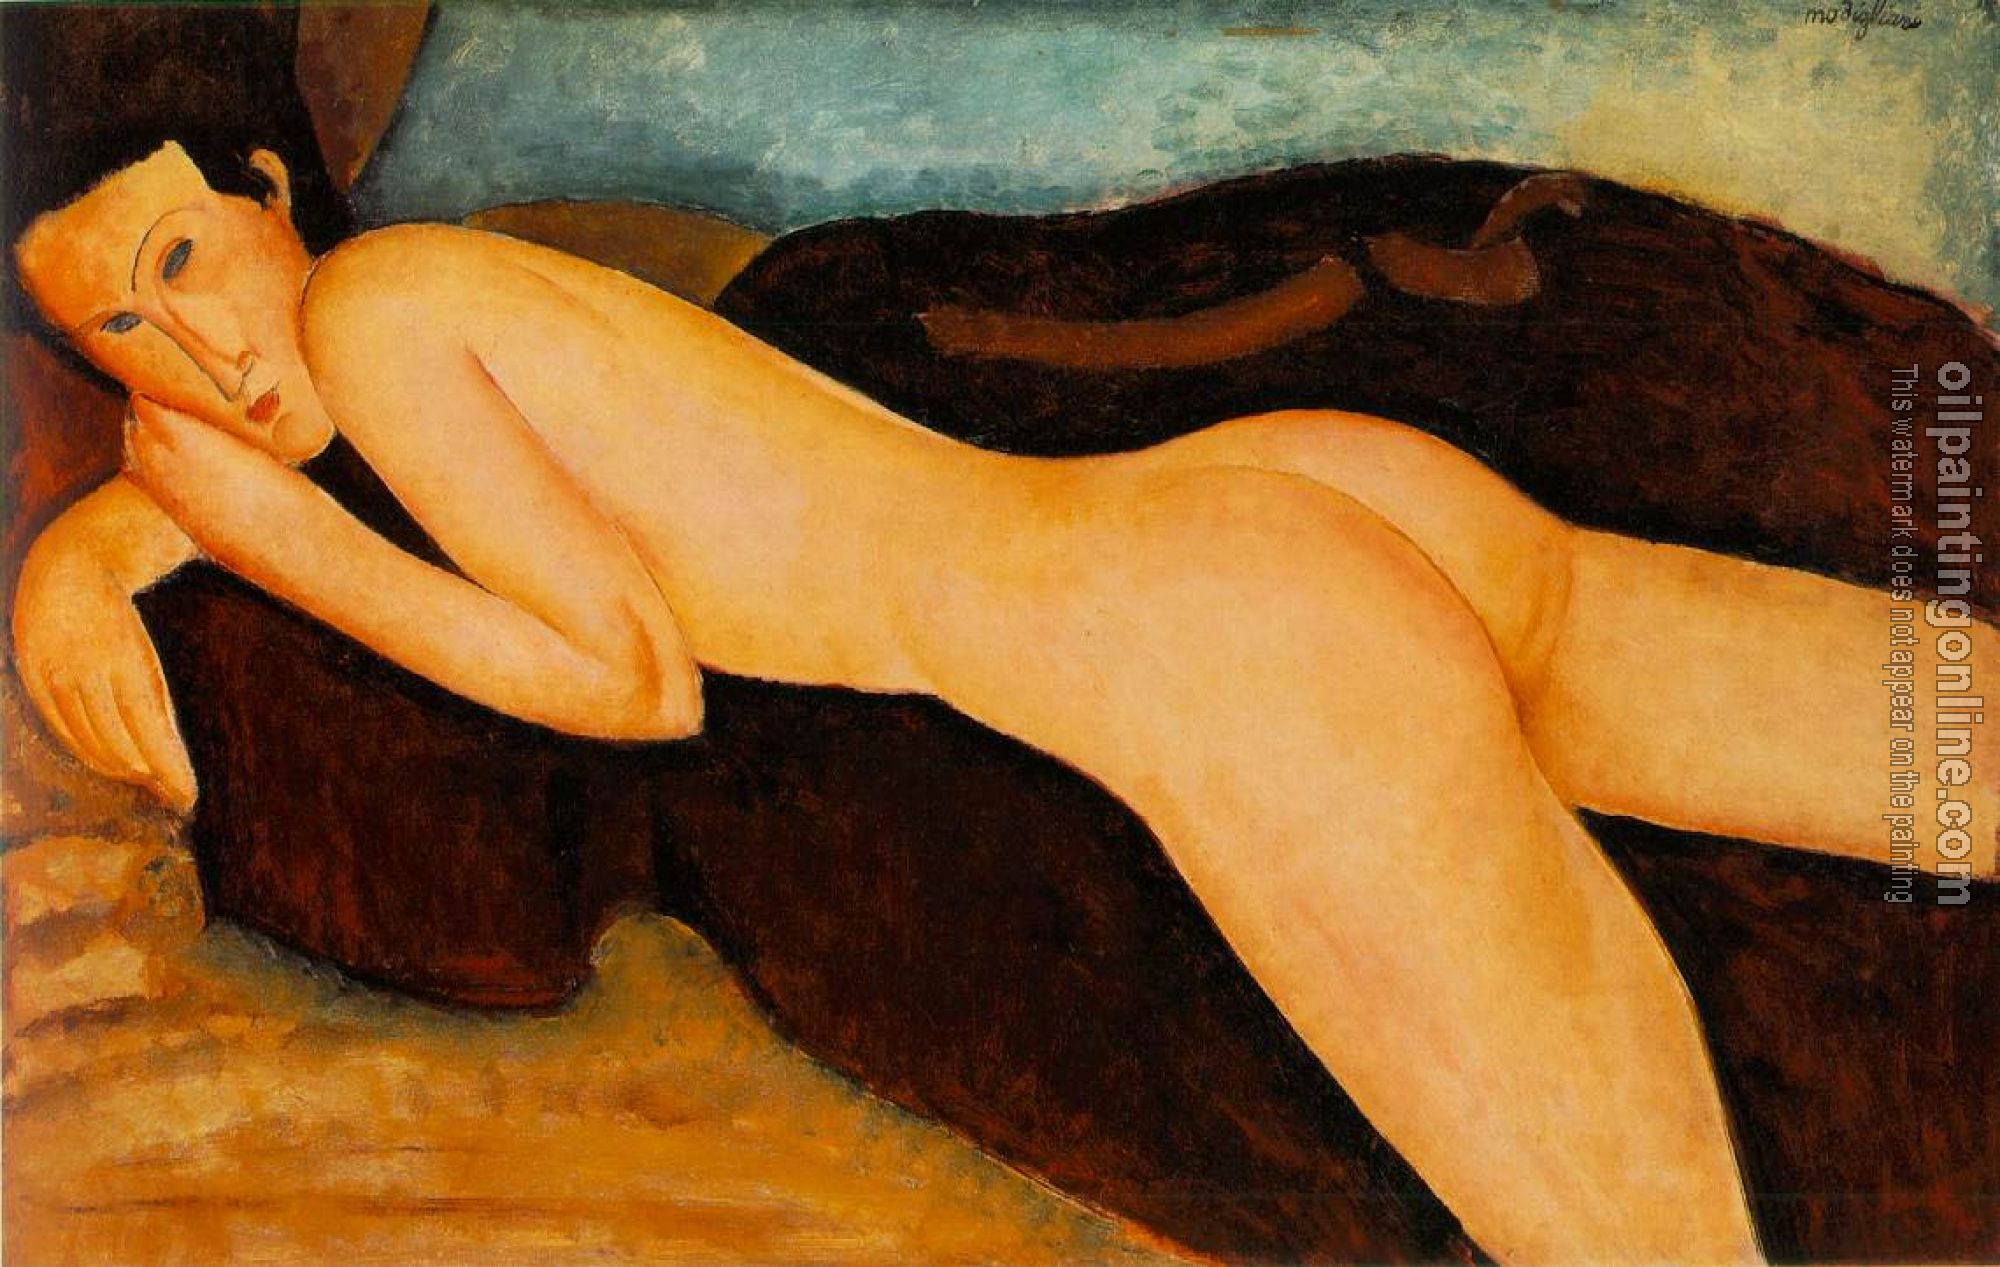 Modigliani, Amedeo - Nu couche de dos (Reclining Nude from the Back)